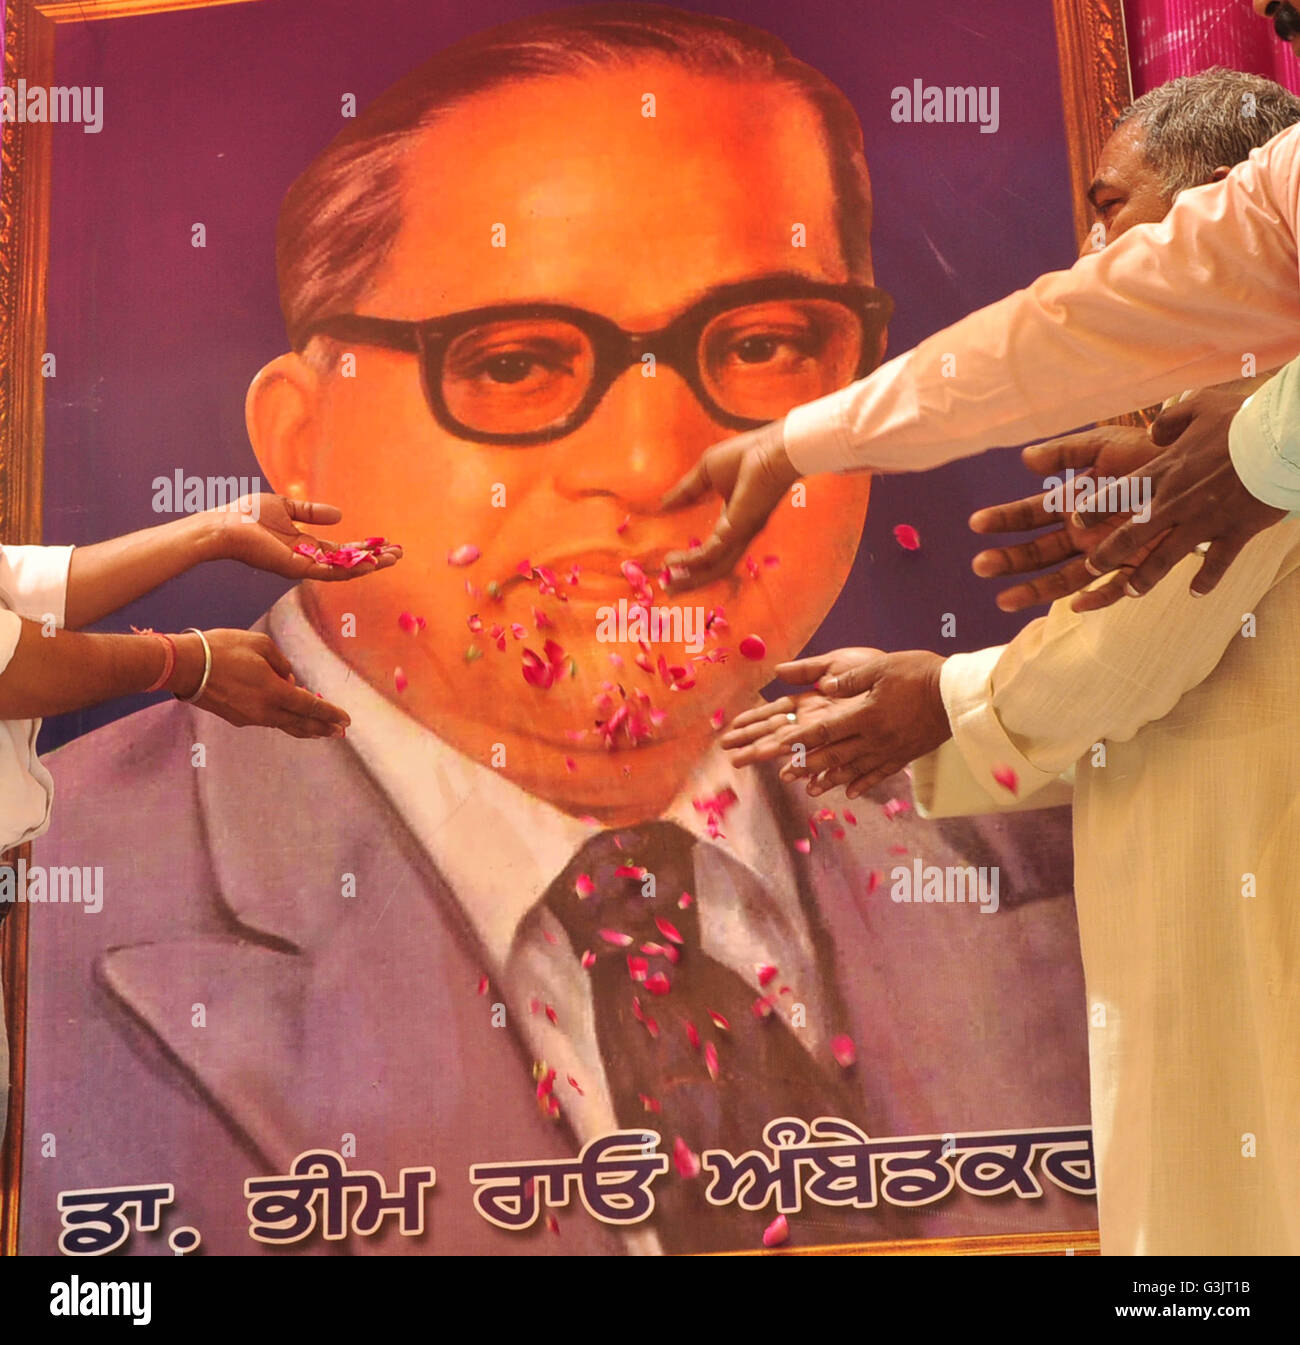 Patiala, India. 14th Apr, 2016. BJP worker tribute to Dr. Bhim Rao Ambedkar on his 125th Birth Anniversary at Bus Stand Chowk. He is popularly known as Babasaheb, was an Indian jurist, economist, politician and social reformer who inspired the Dalit Buddhist movement and campaigned against social Discrimination against Untouchables (Dalits), while also supporting the rights of women and labor. He was Independent India's first law minister and the principal architect of the Constitution of India. © Rajesh Sachar/Pacific Press/Alamy Live News Stock Photo